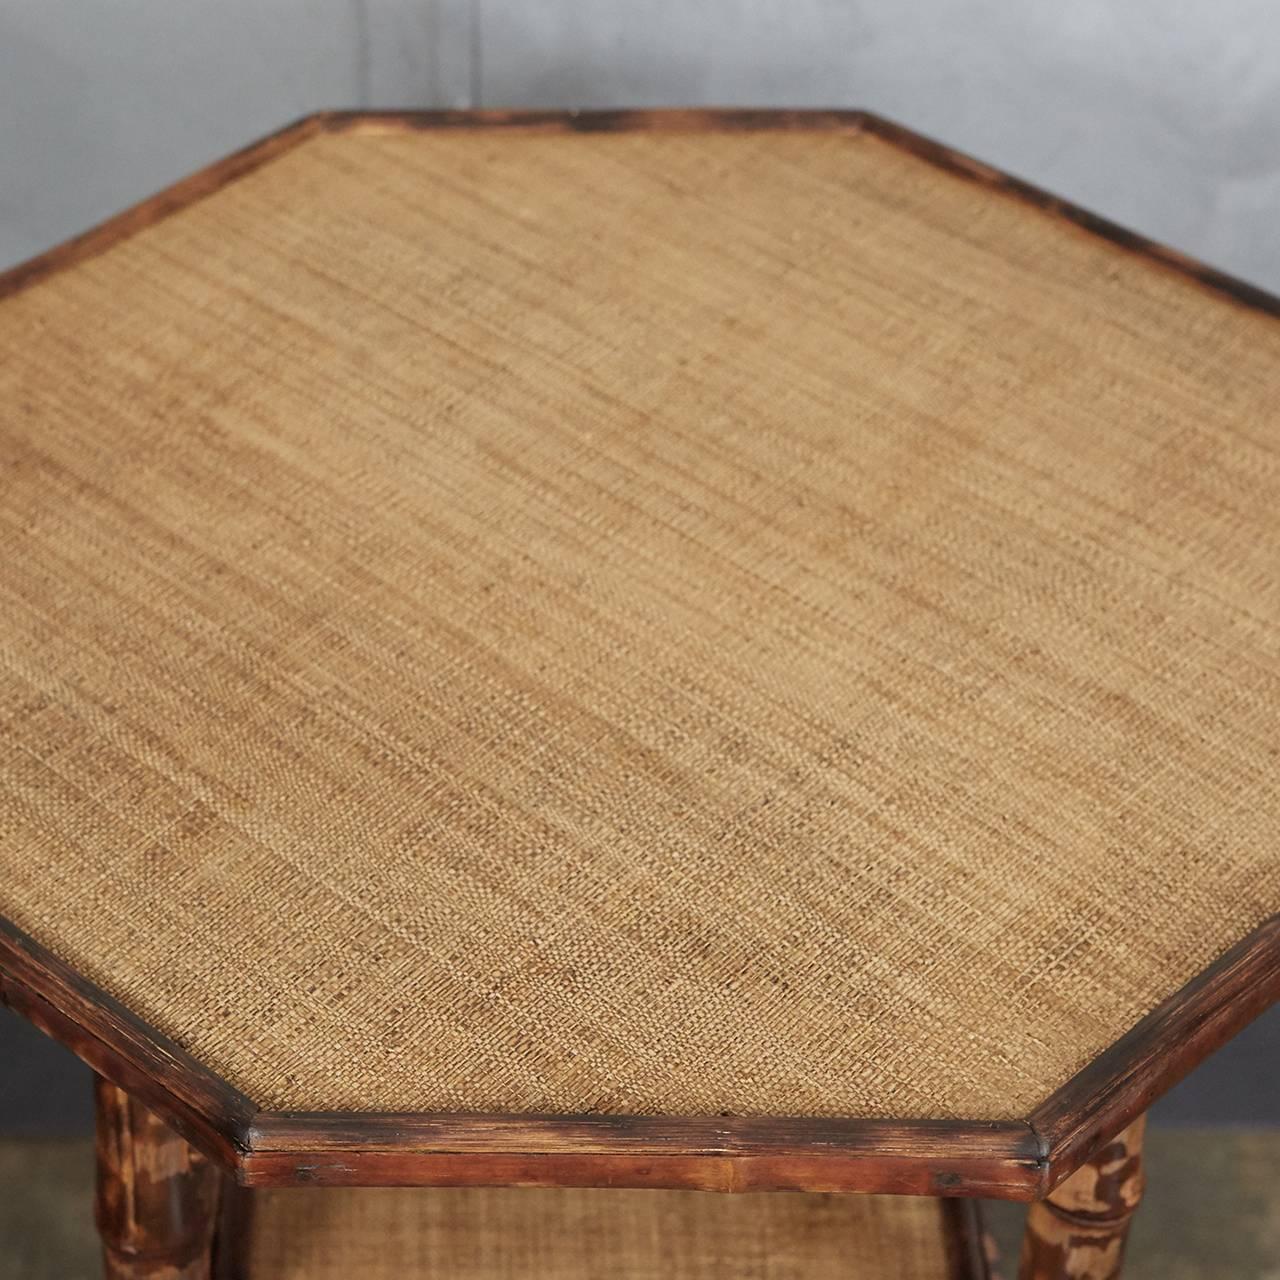 This English Victorian tiger bamboo table has an octagonal top, angled supports, two shelves and out-turned feet. The legs have been reinforced with wooden dowels for increased sturdiness. The surfaces have been newly re-done in waxed raffia